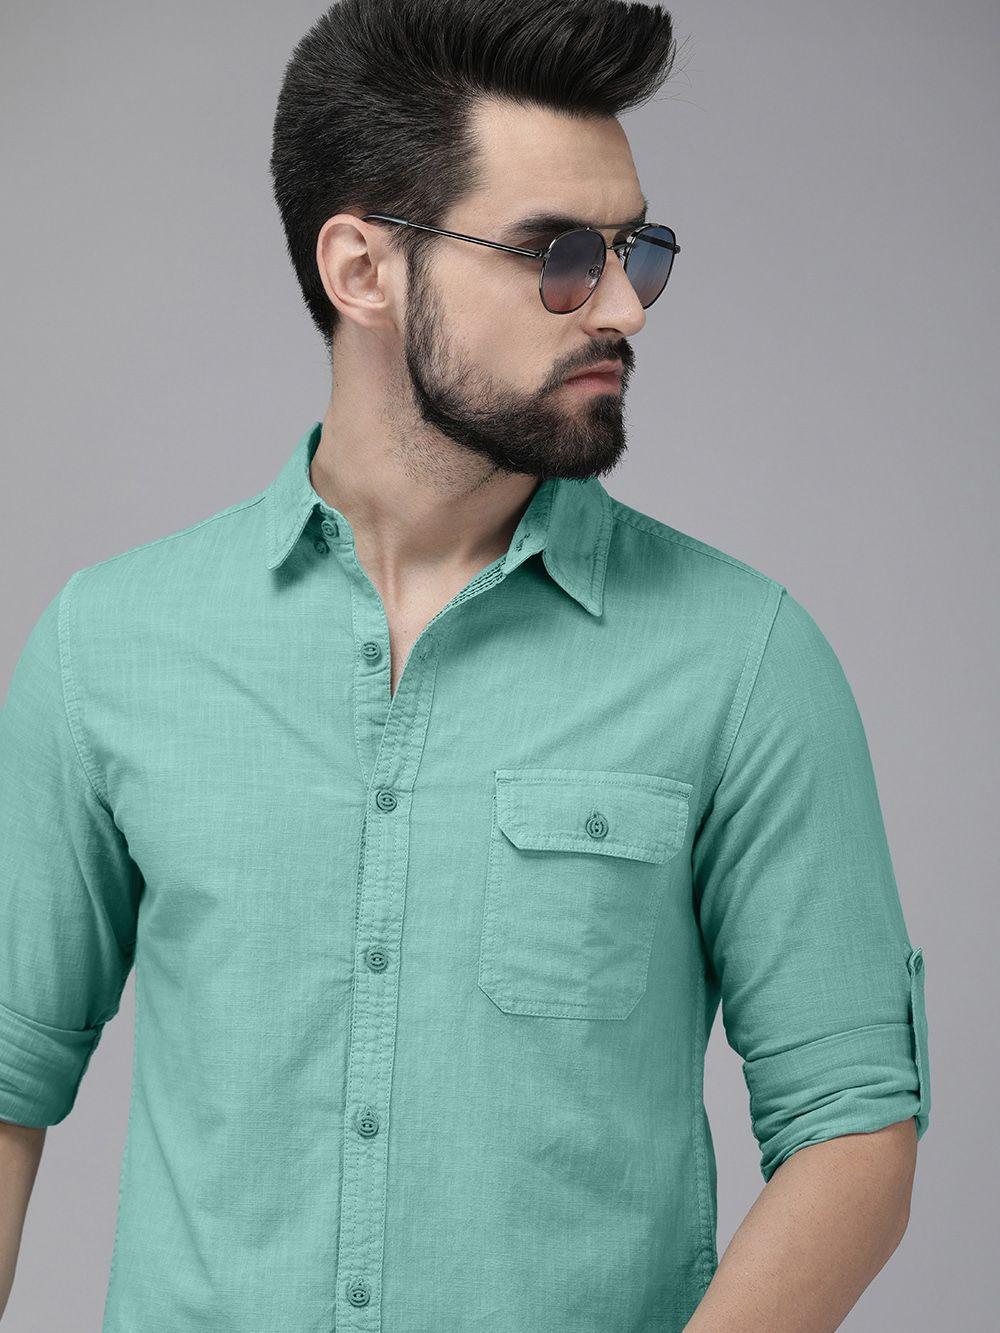 the roadster lifestyle co. men sea blue solid pure cotton casual shirt